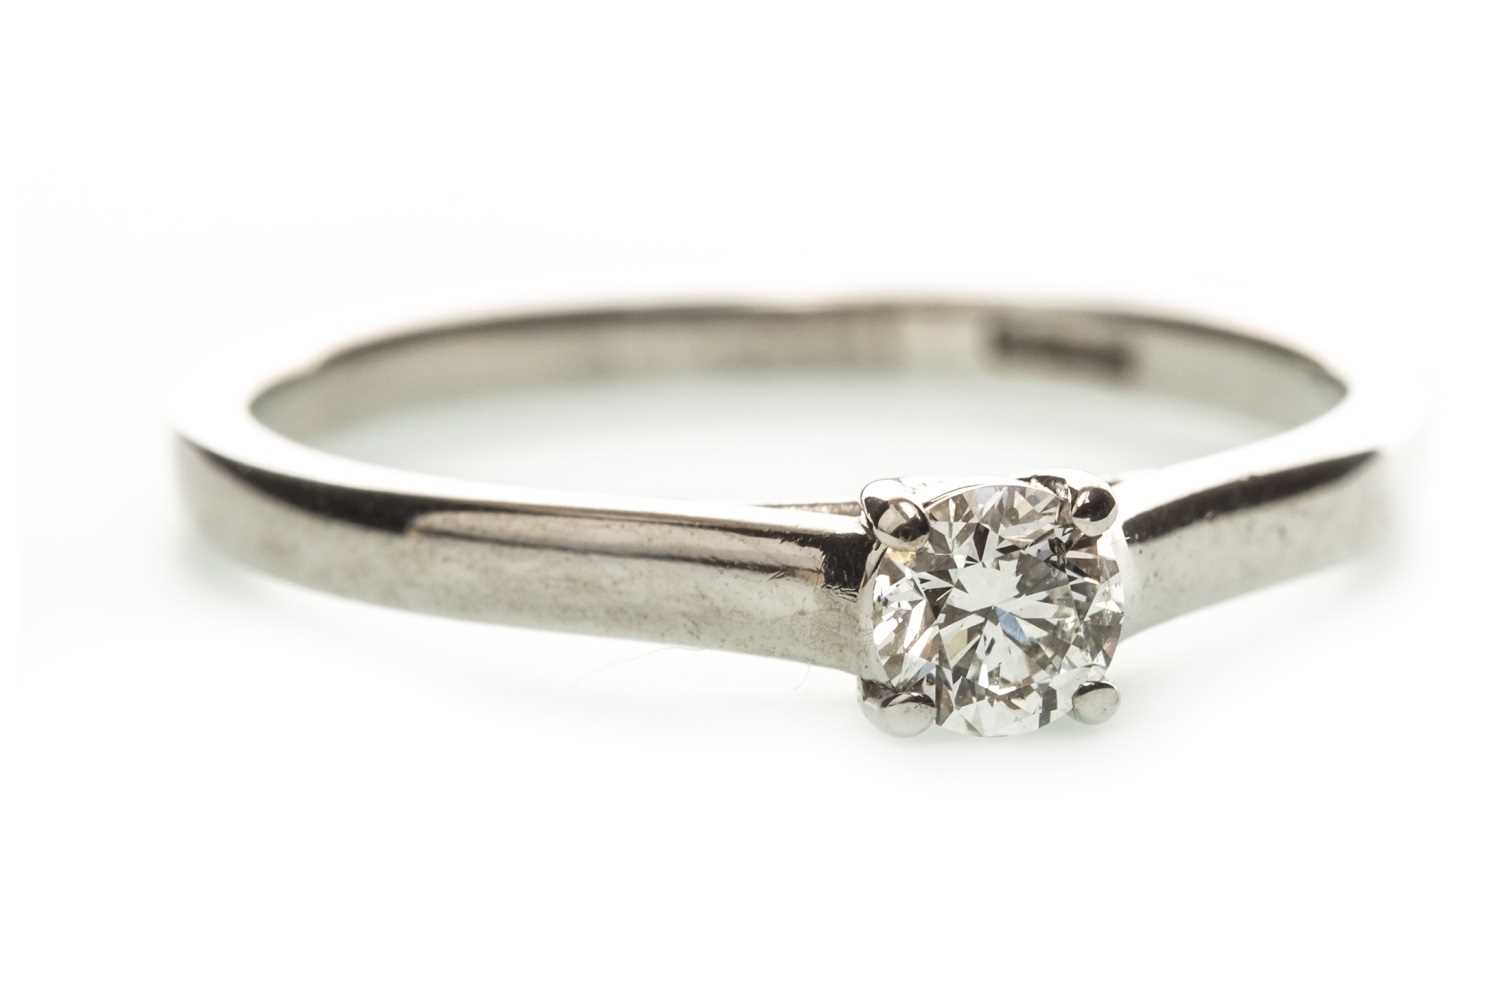 Lot 173 - A DIAMOND SOLITAIRE RING